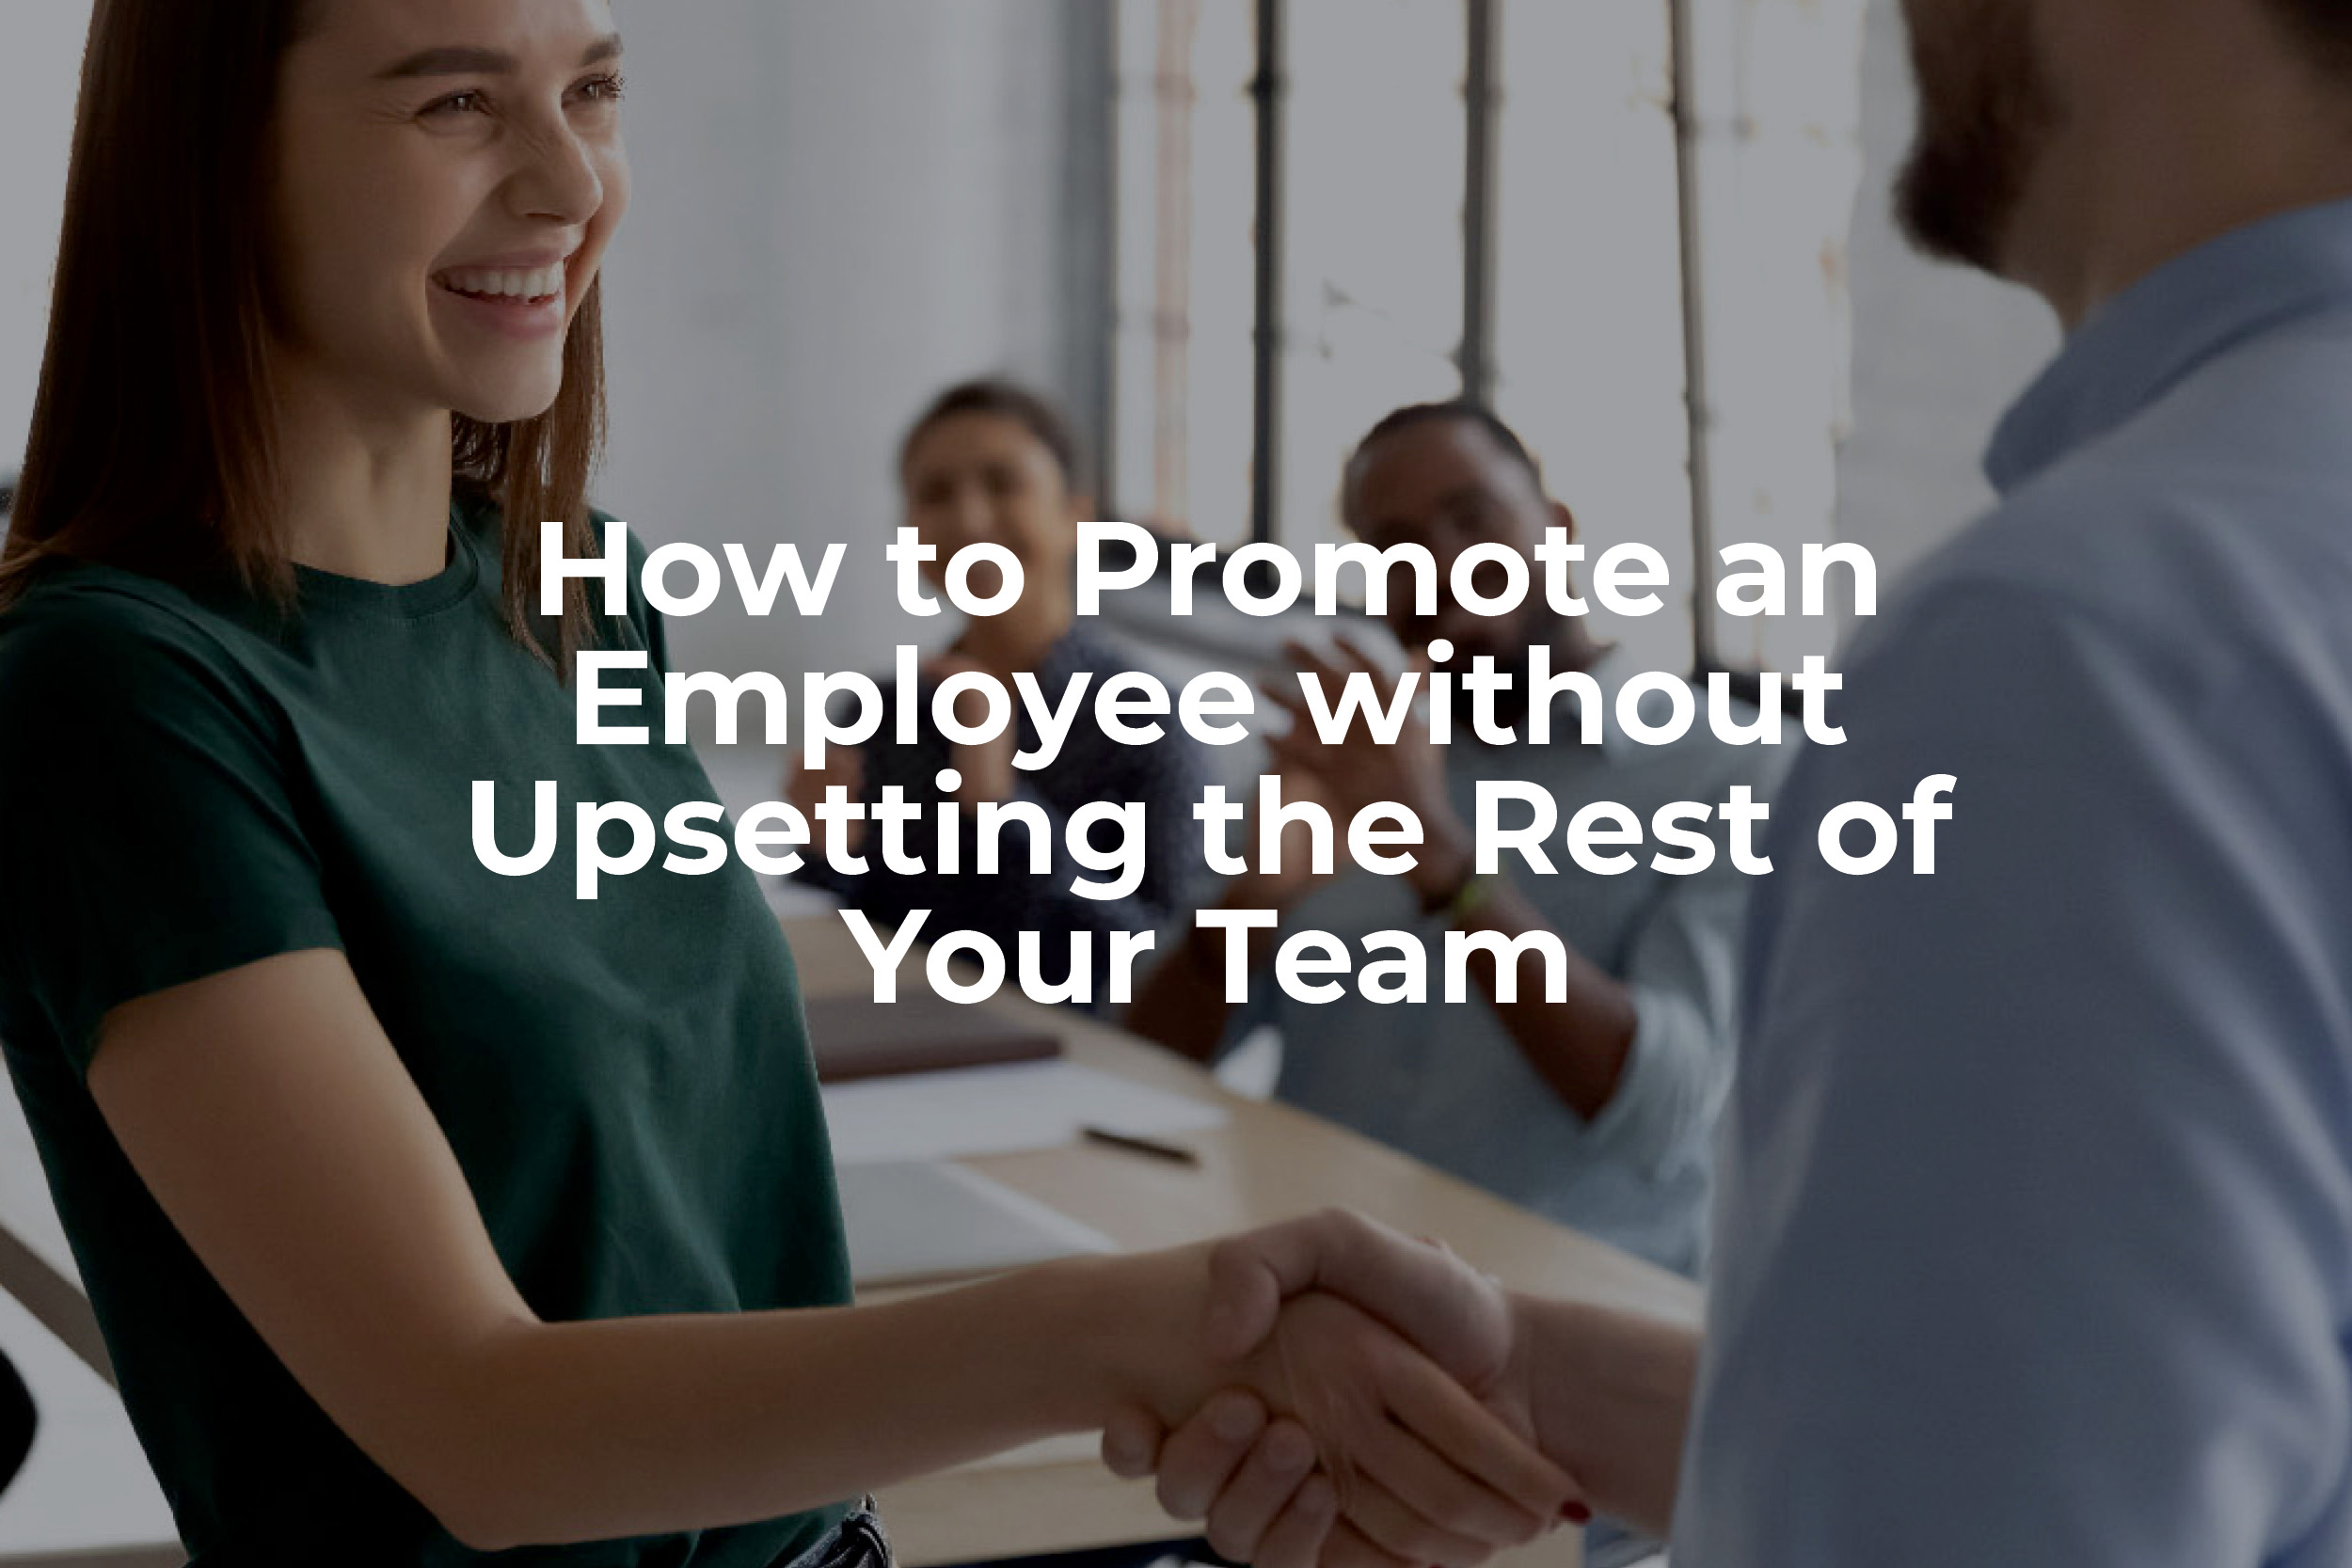 How to Promote an Employee without Upsetting the Rest of Your Team